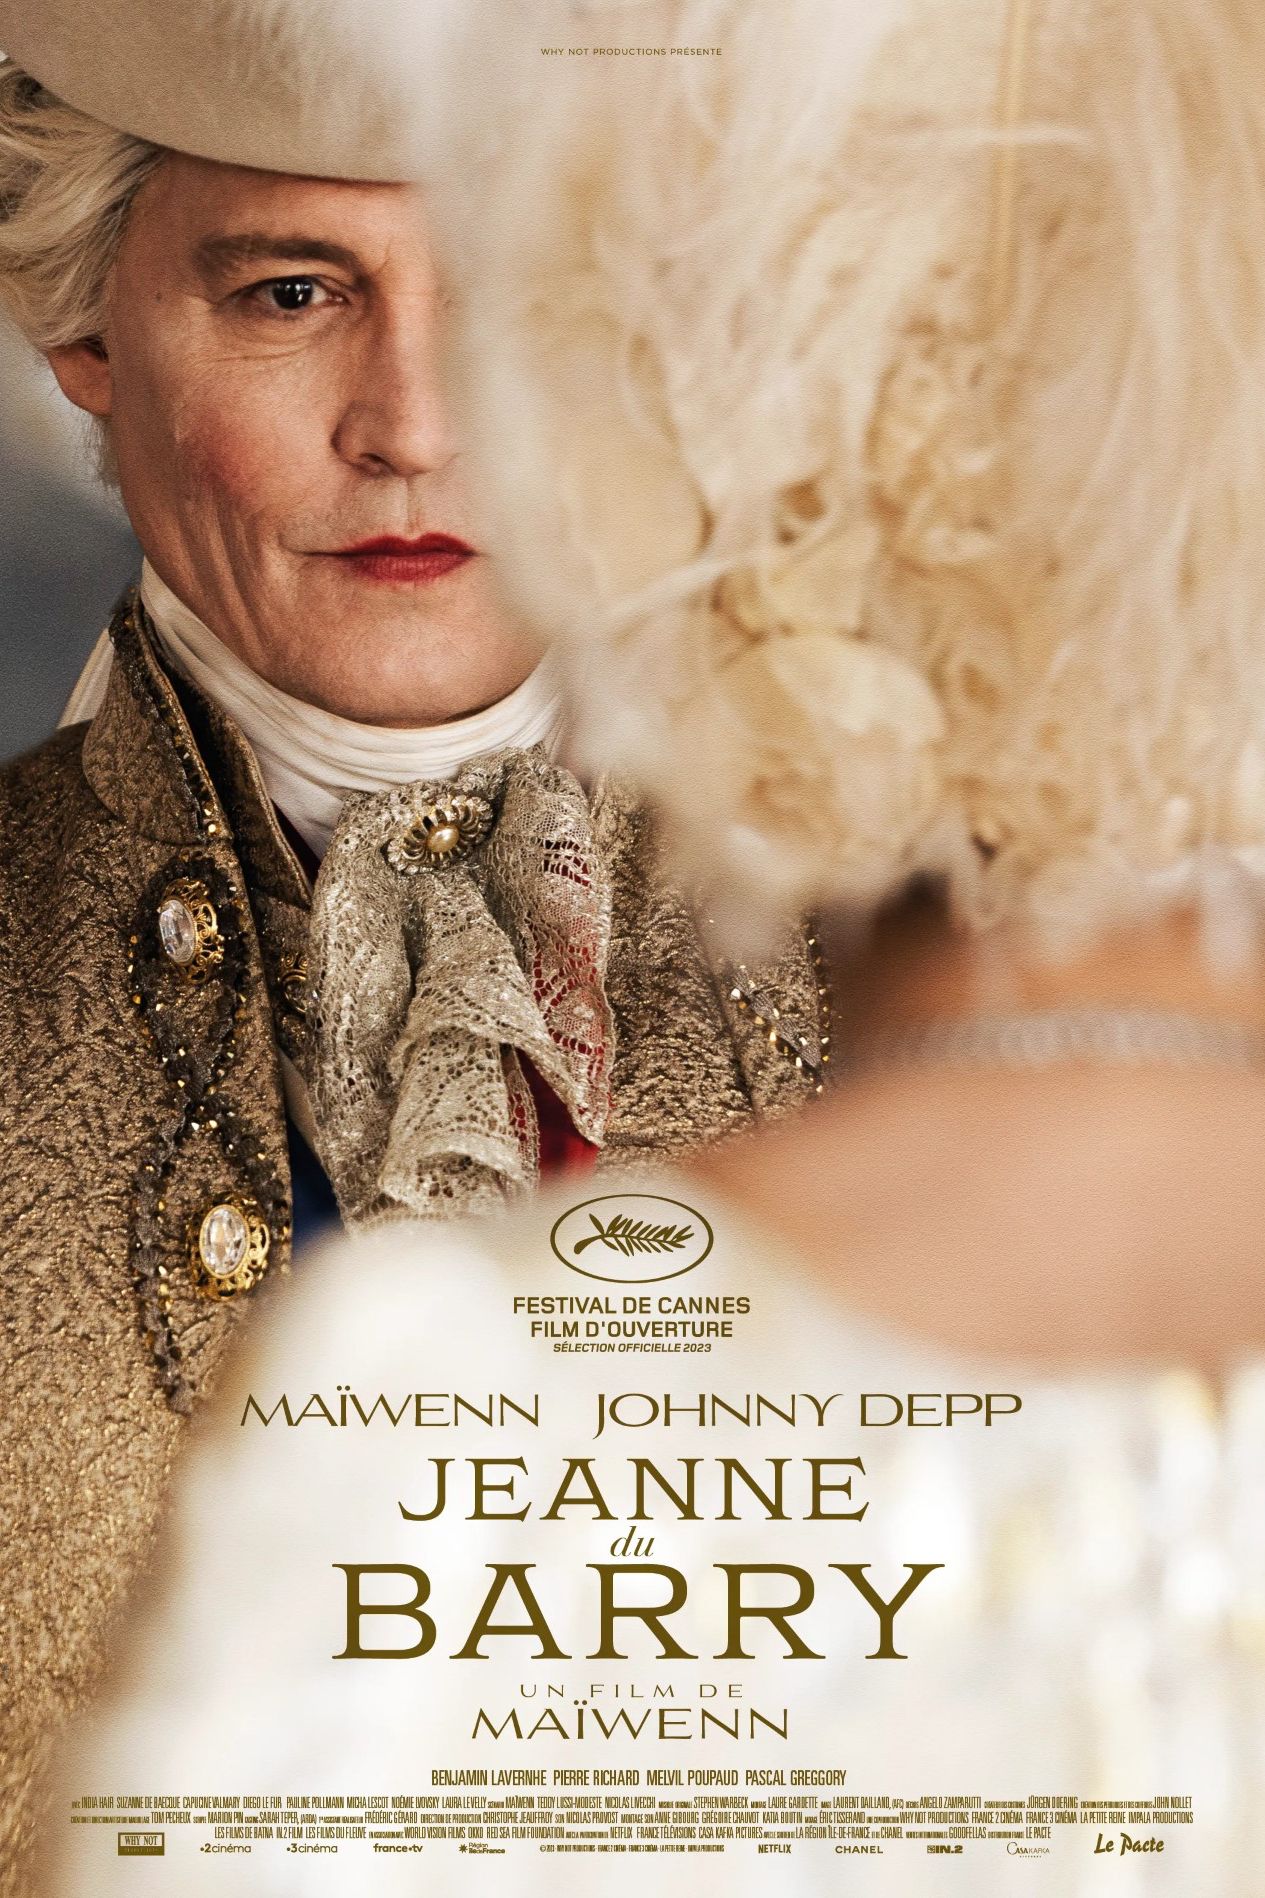 Johnny Depp Returns In A Compelling, Unfocused French Period Drama Film